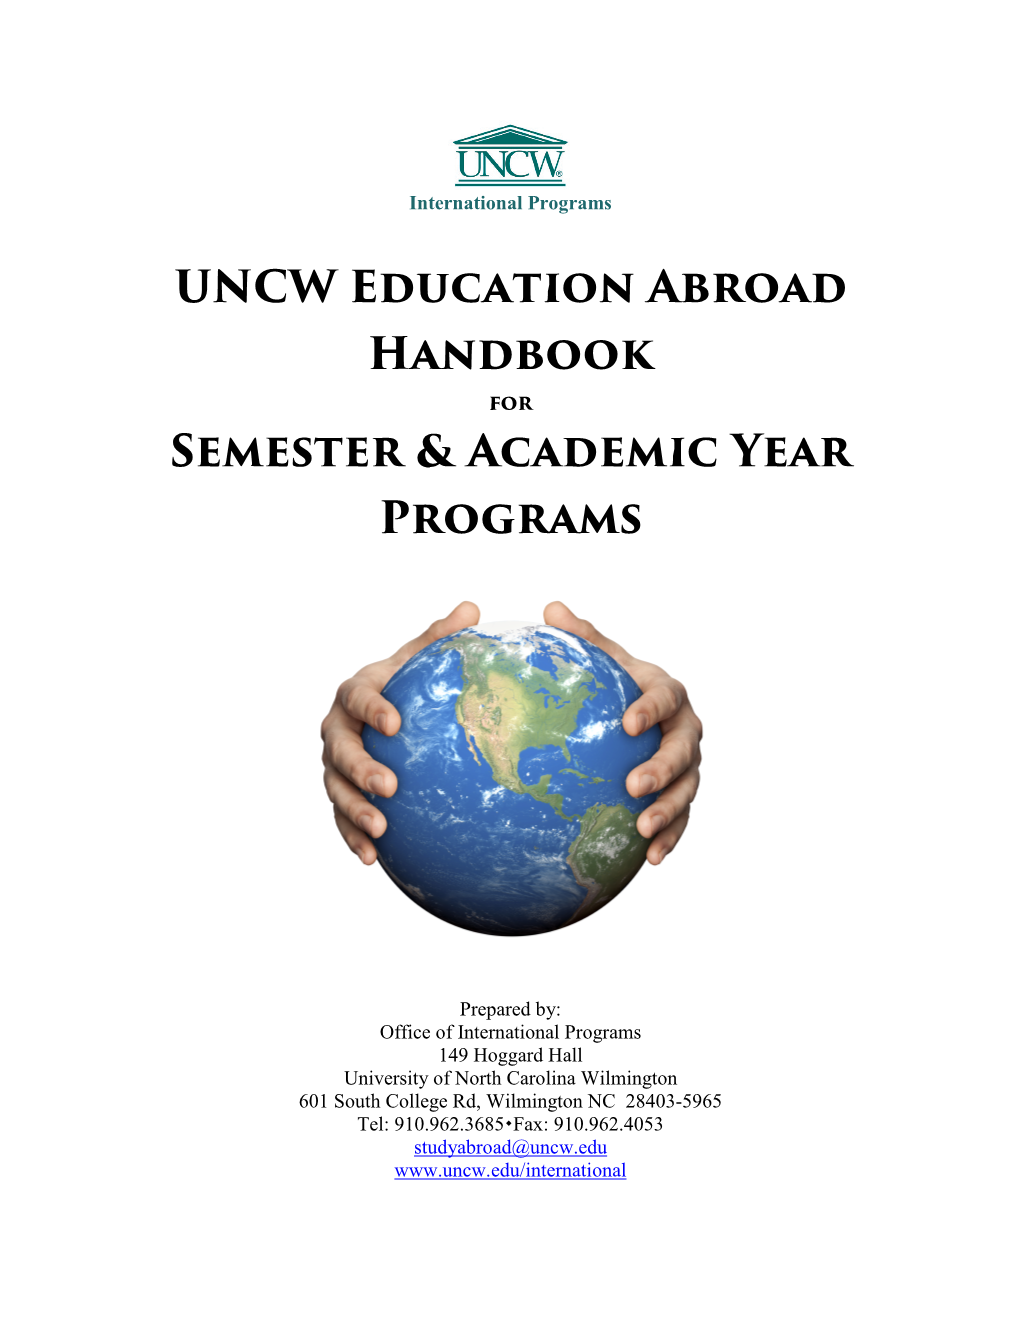 UNCW Education Abroad Handbook for Semester and Academic Year